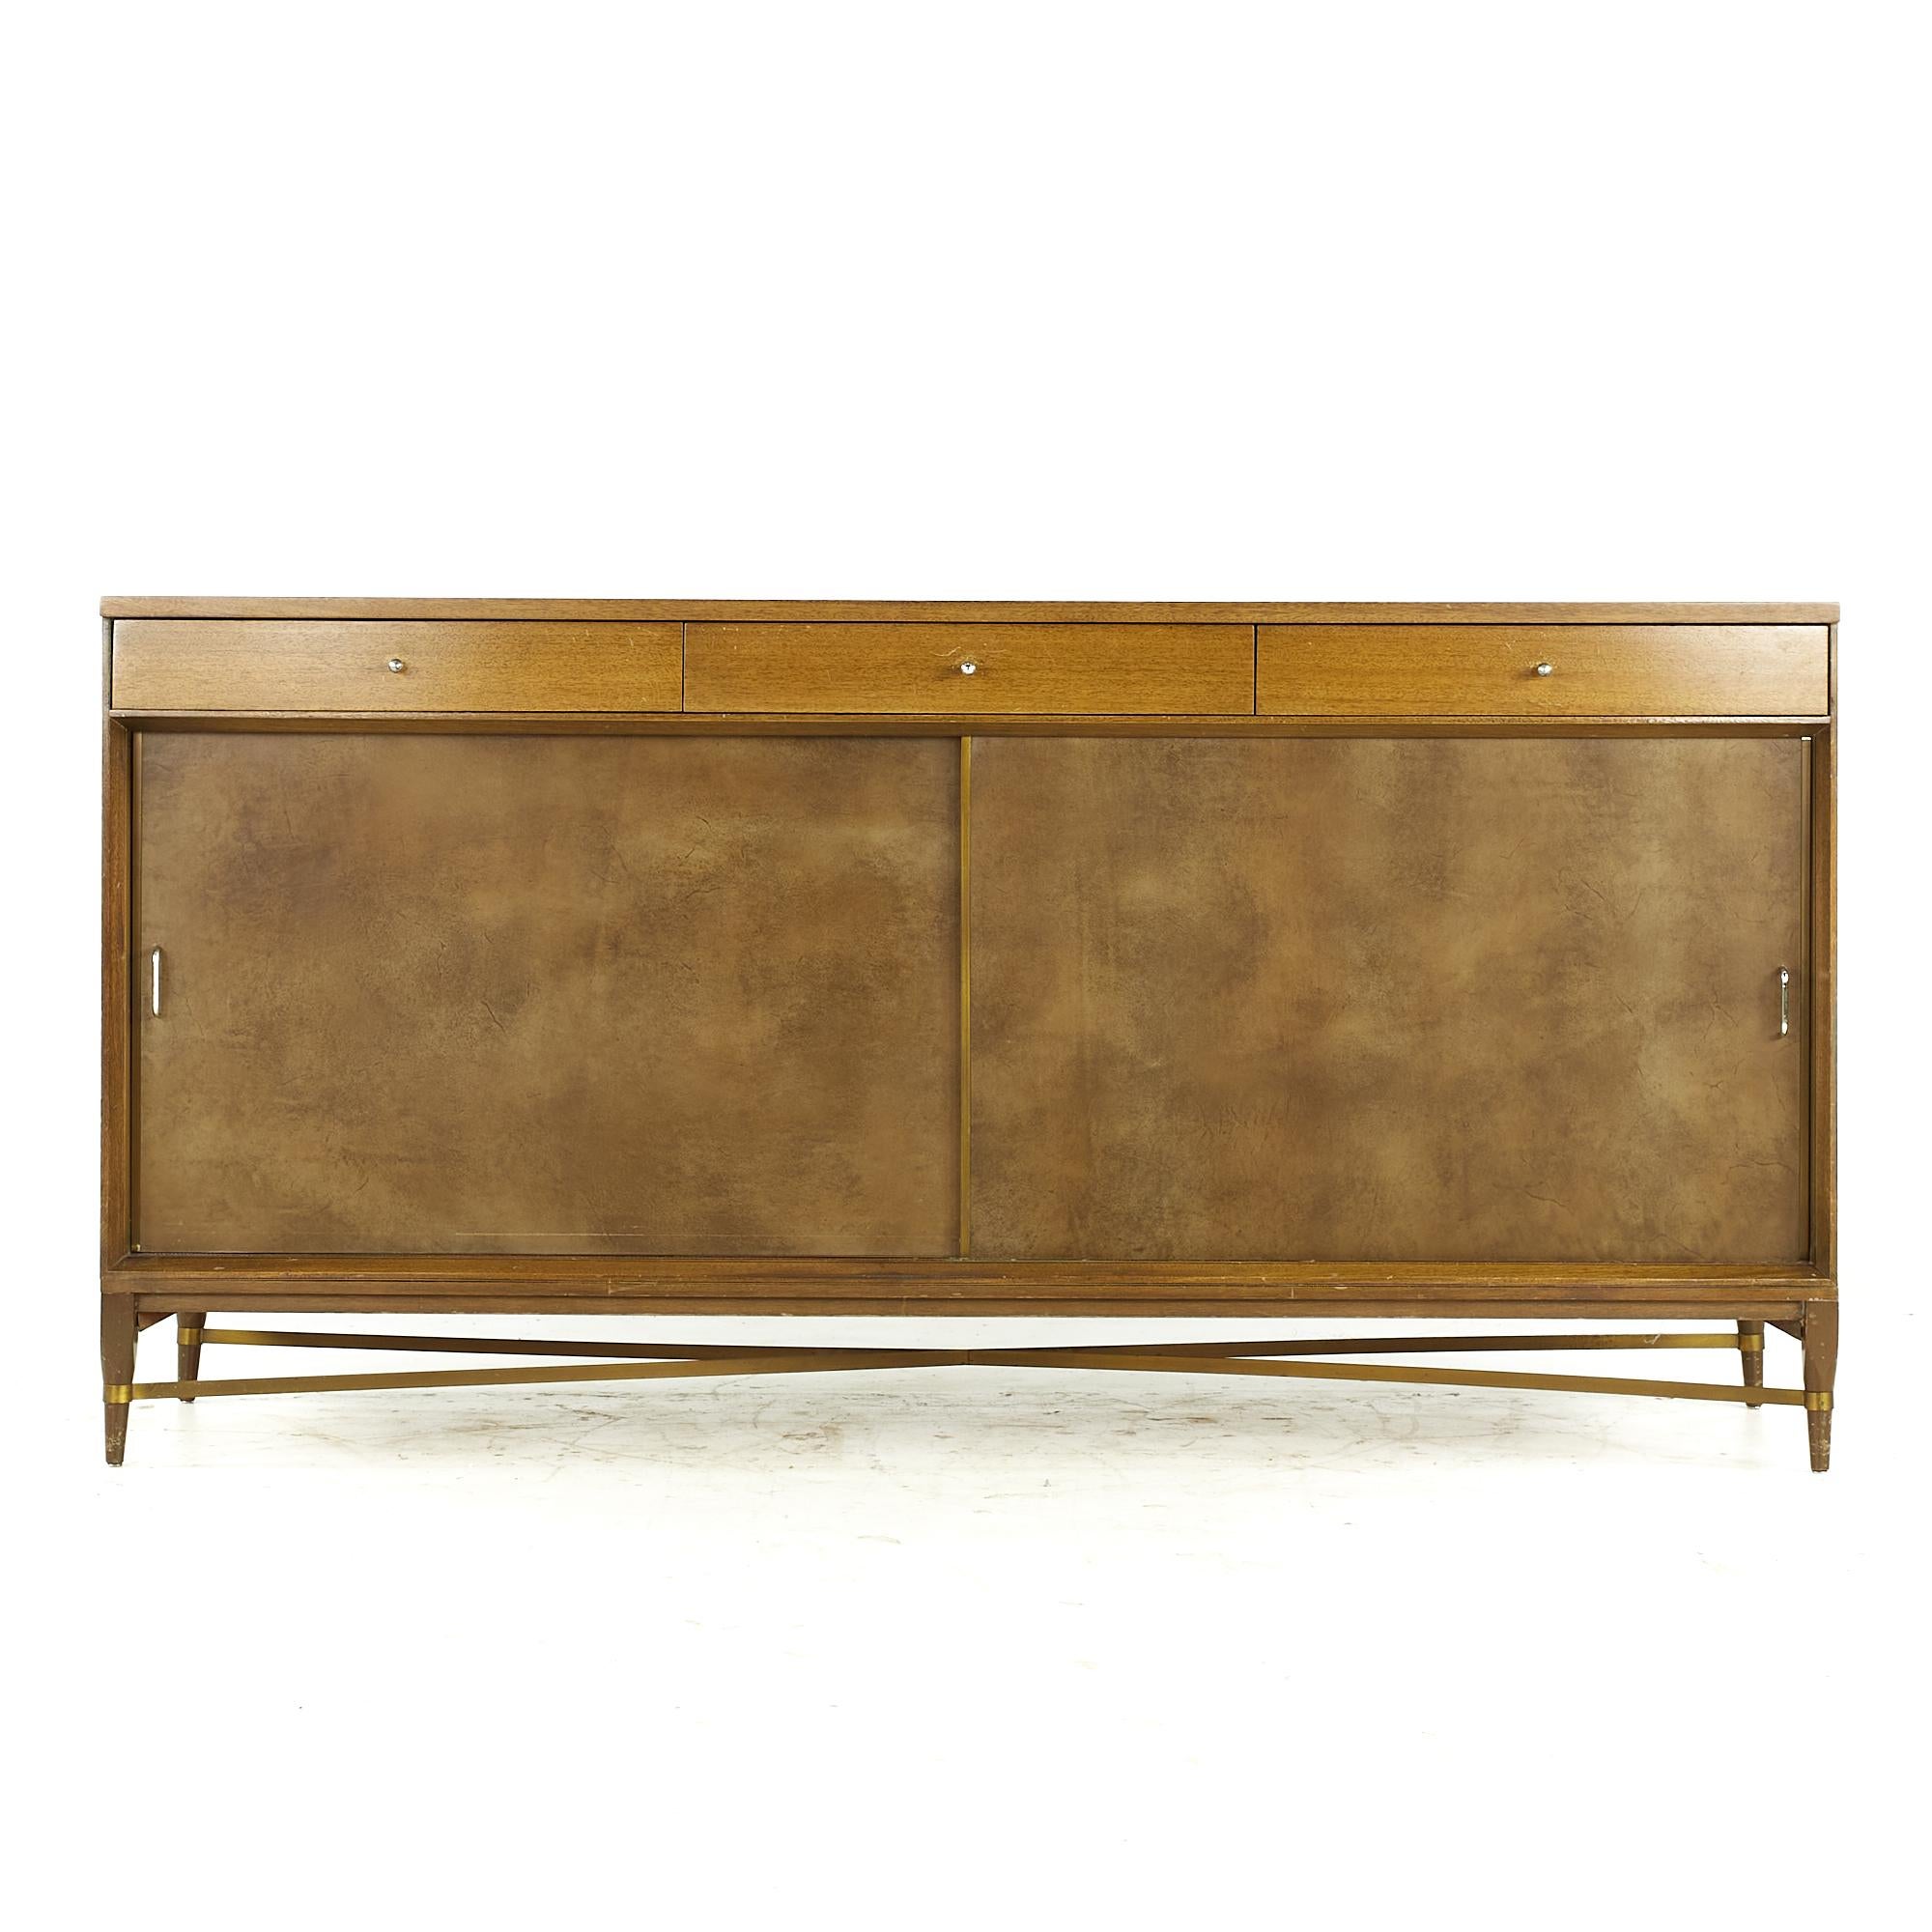 Paul McCobb for Calvin midcentury Mahogany and Brass Credenza

This credenza measures: 66 wide x 19.25 deep x 33.25 inches high

All pieces of furniture can be had in what we call restored vintage condition. That means the piece is restored upon